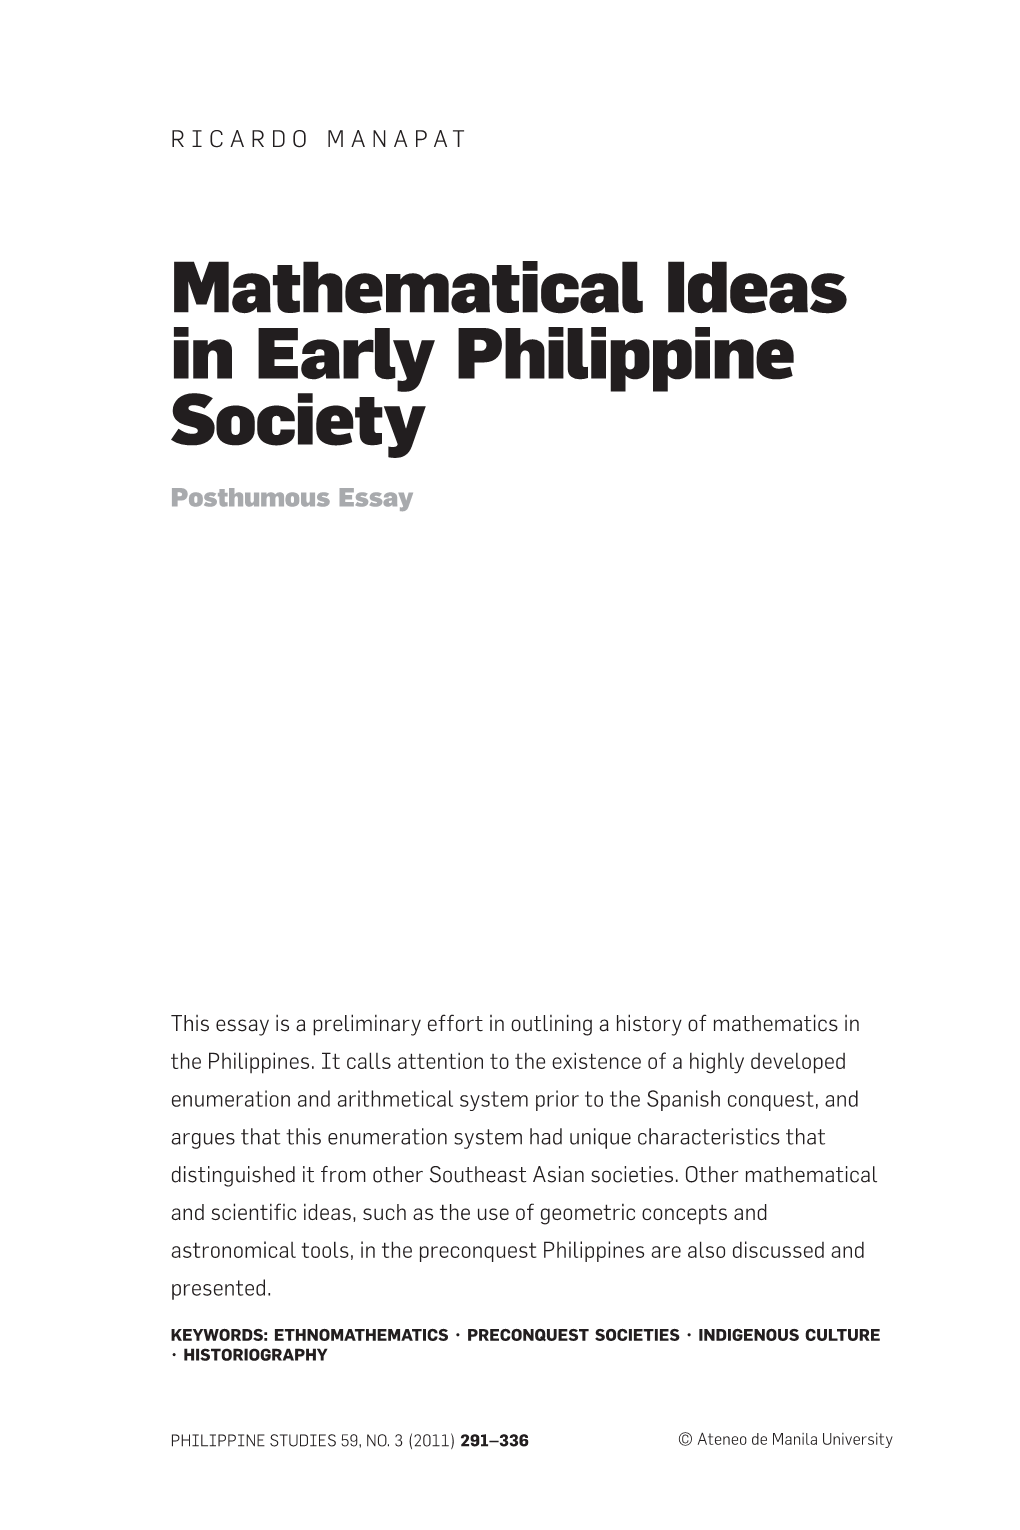 Mathematical Ideas in Early Philippine Society